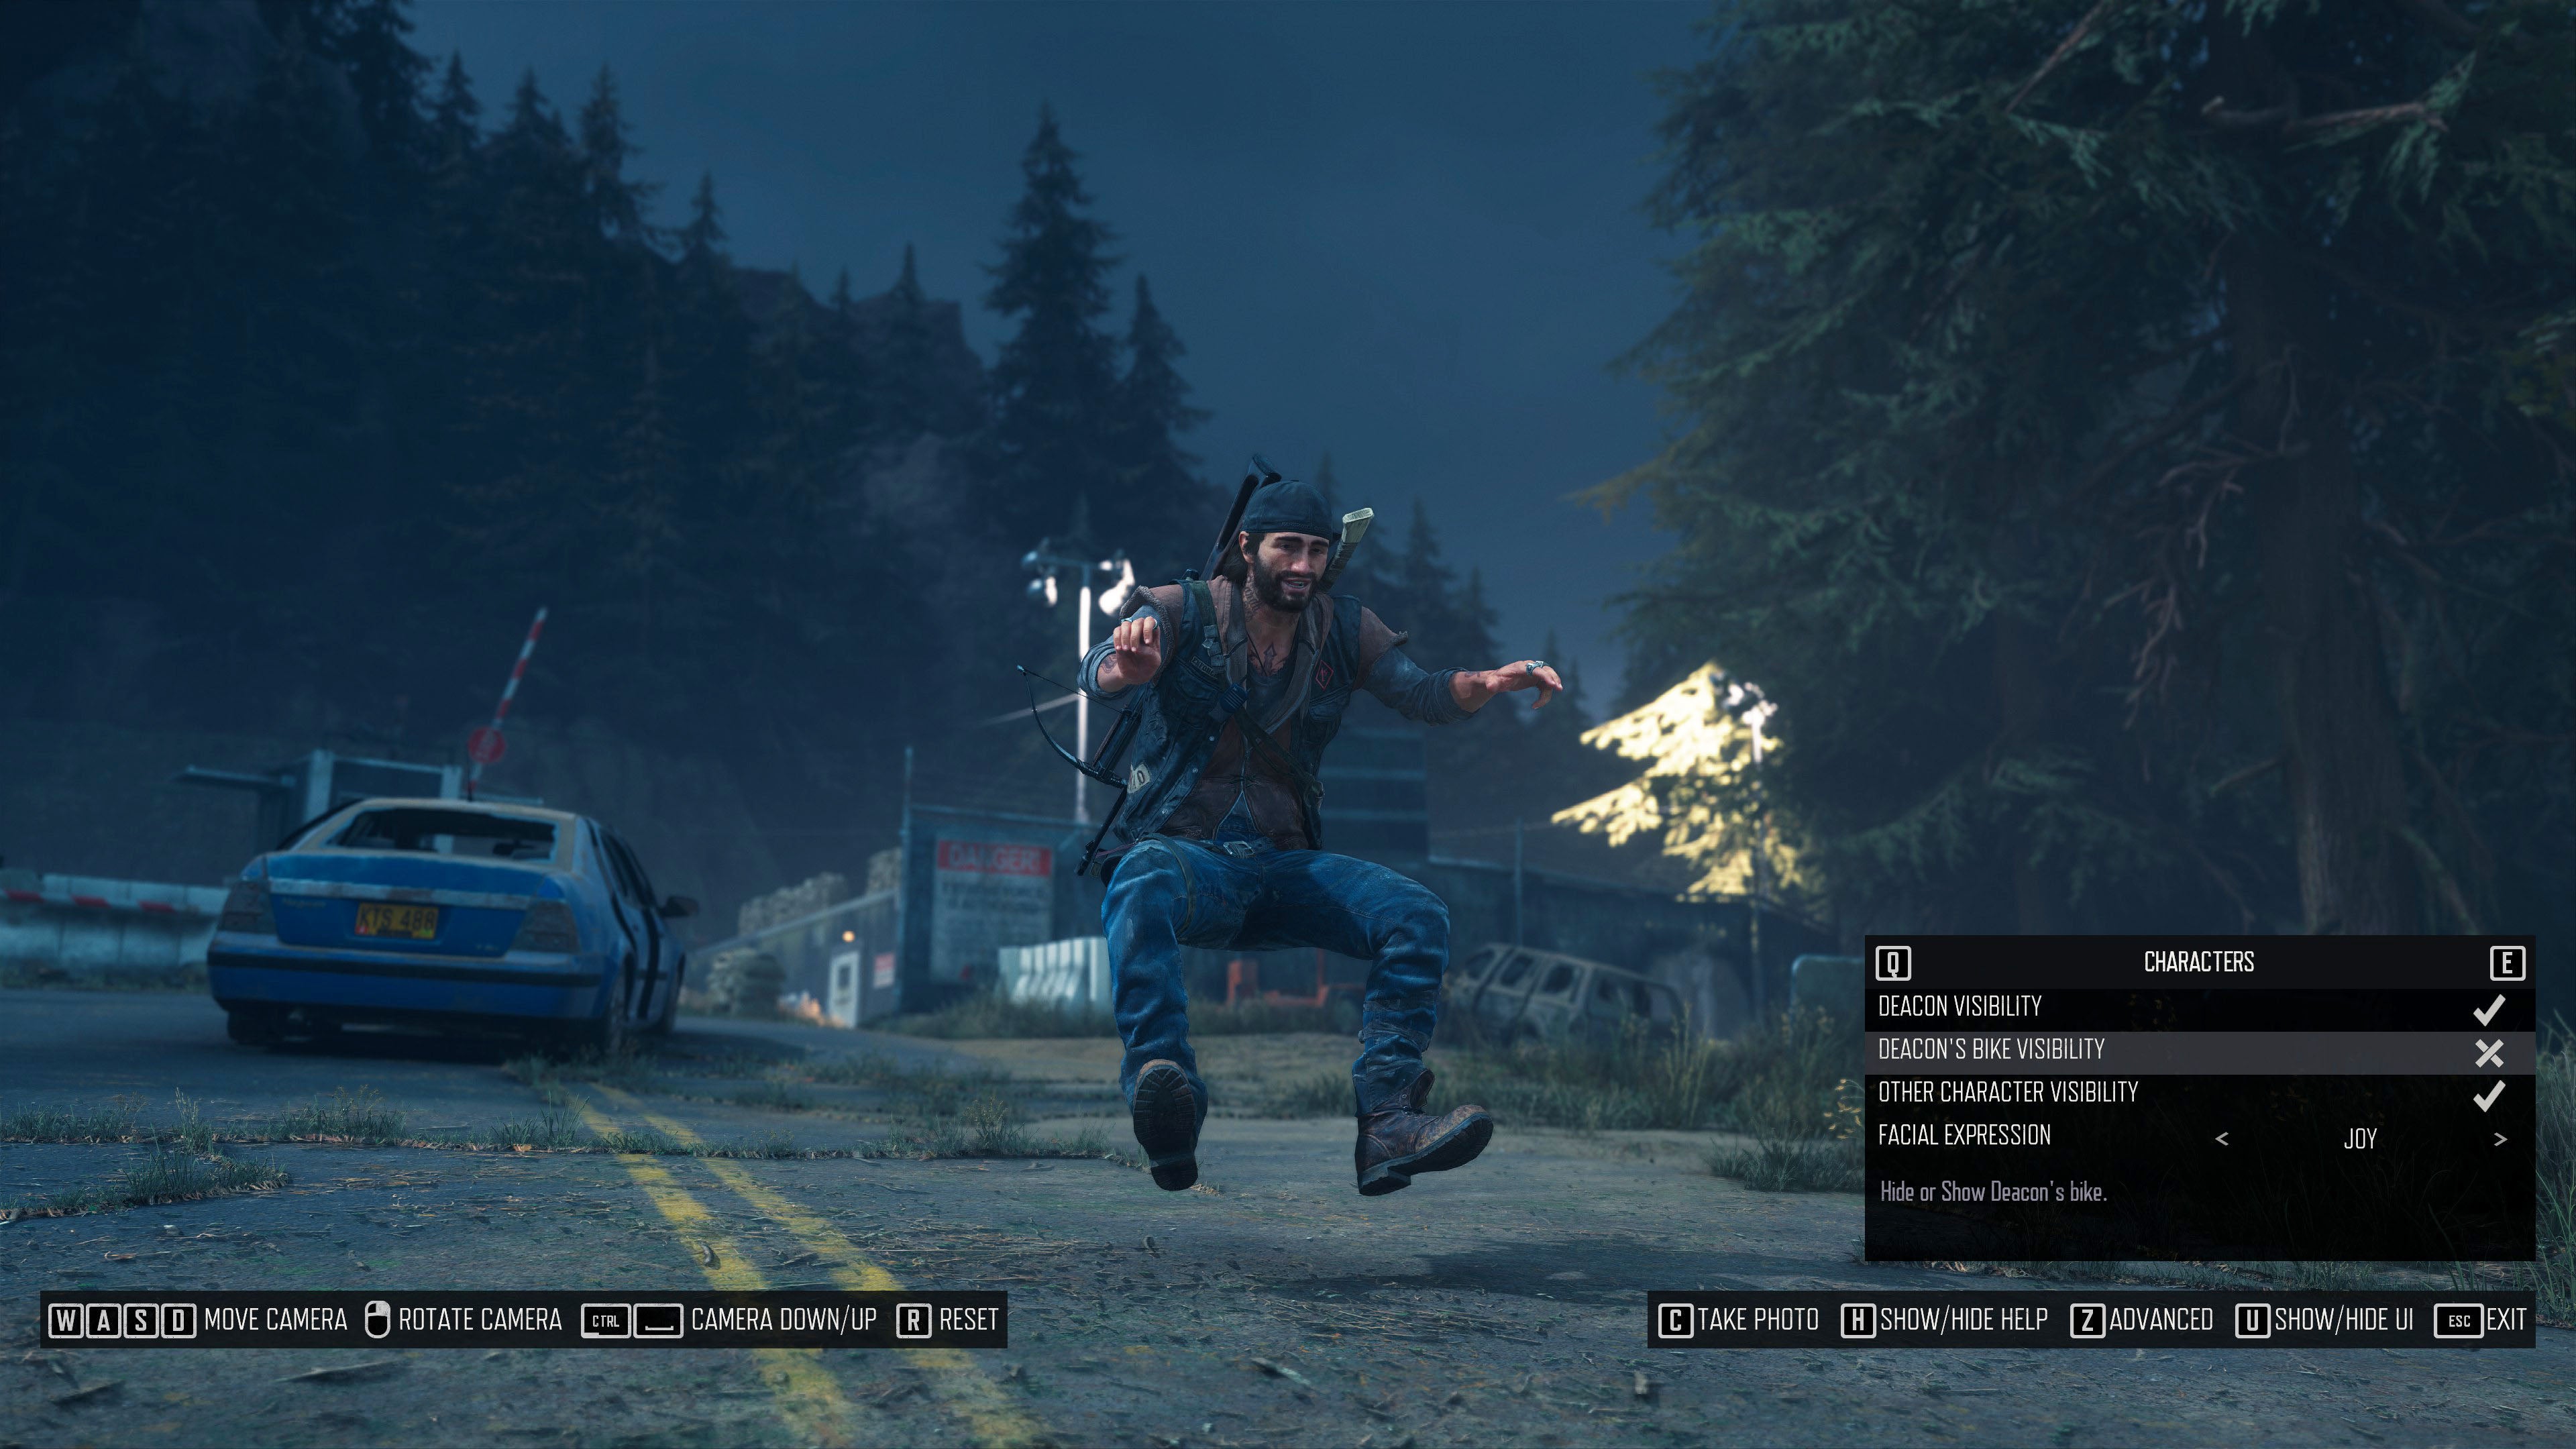 A screenshot of Days Gone's photo mode showing Deacon's bike visibility disabled